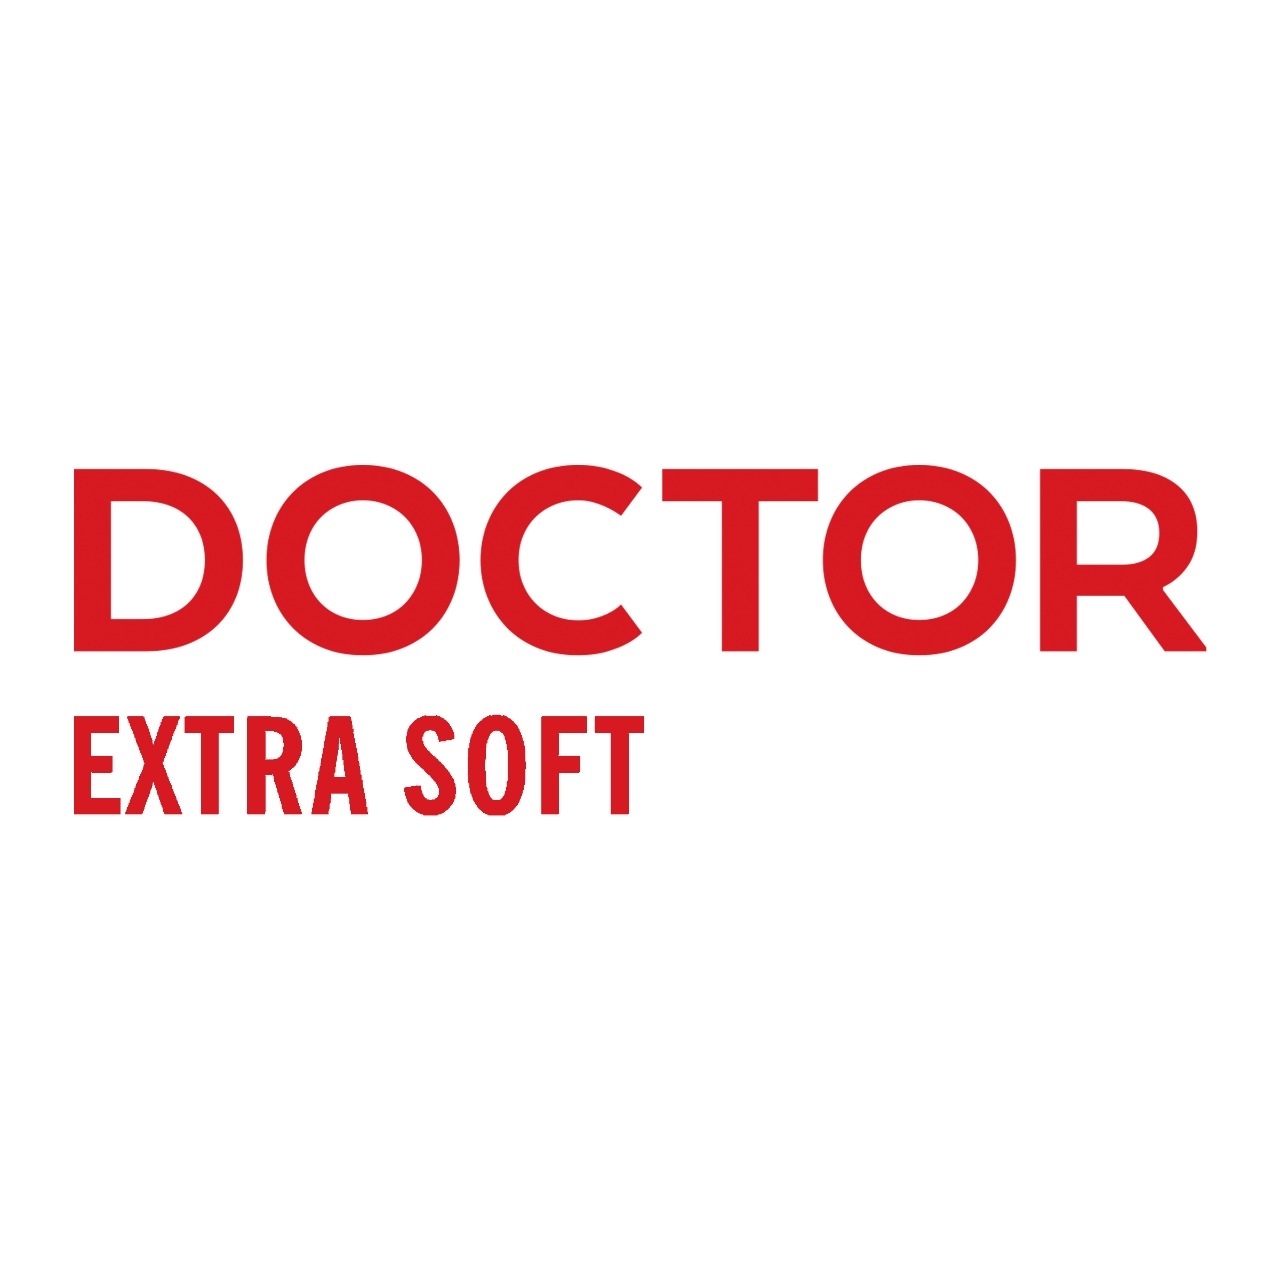 DOCTOR EXTRA SOFT